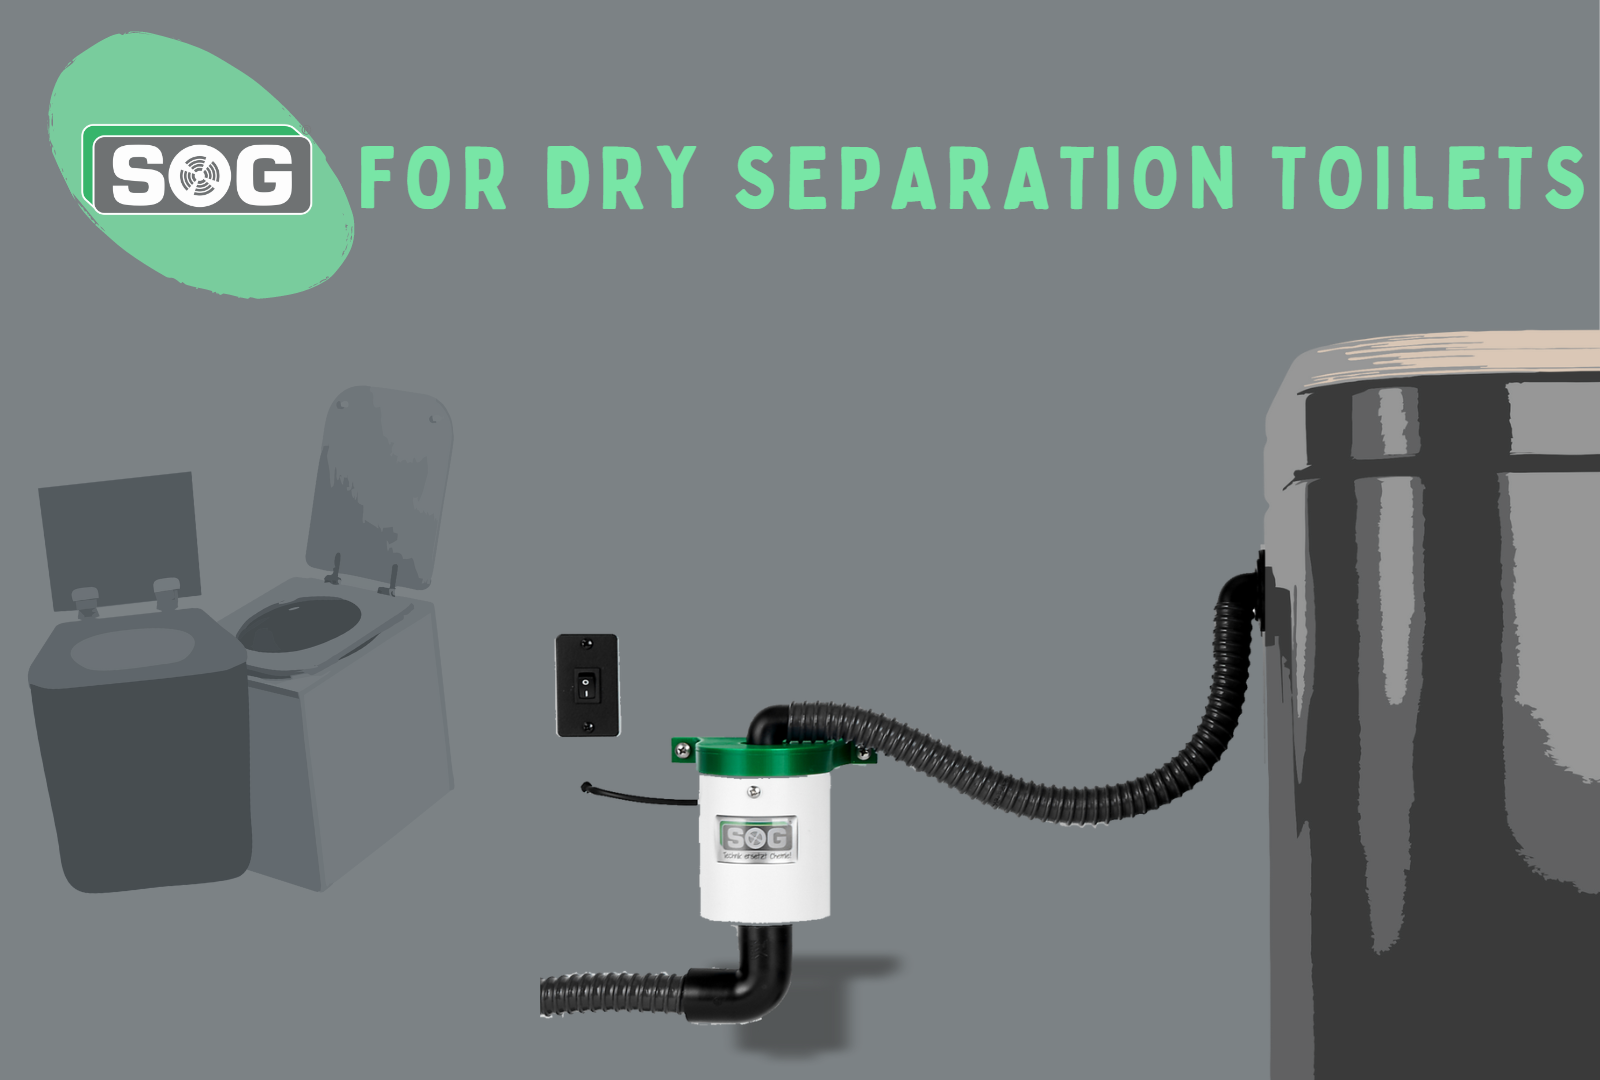 Dry separation toilets